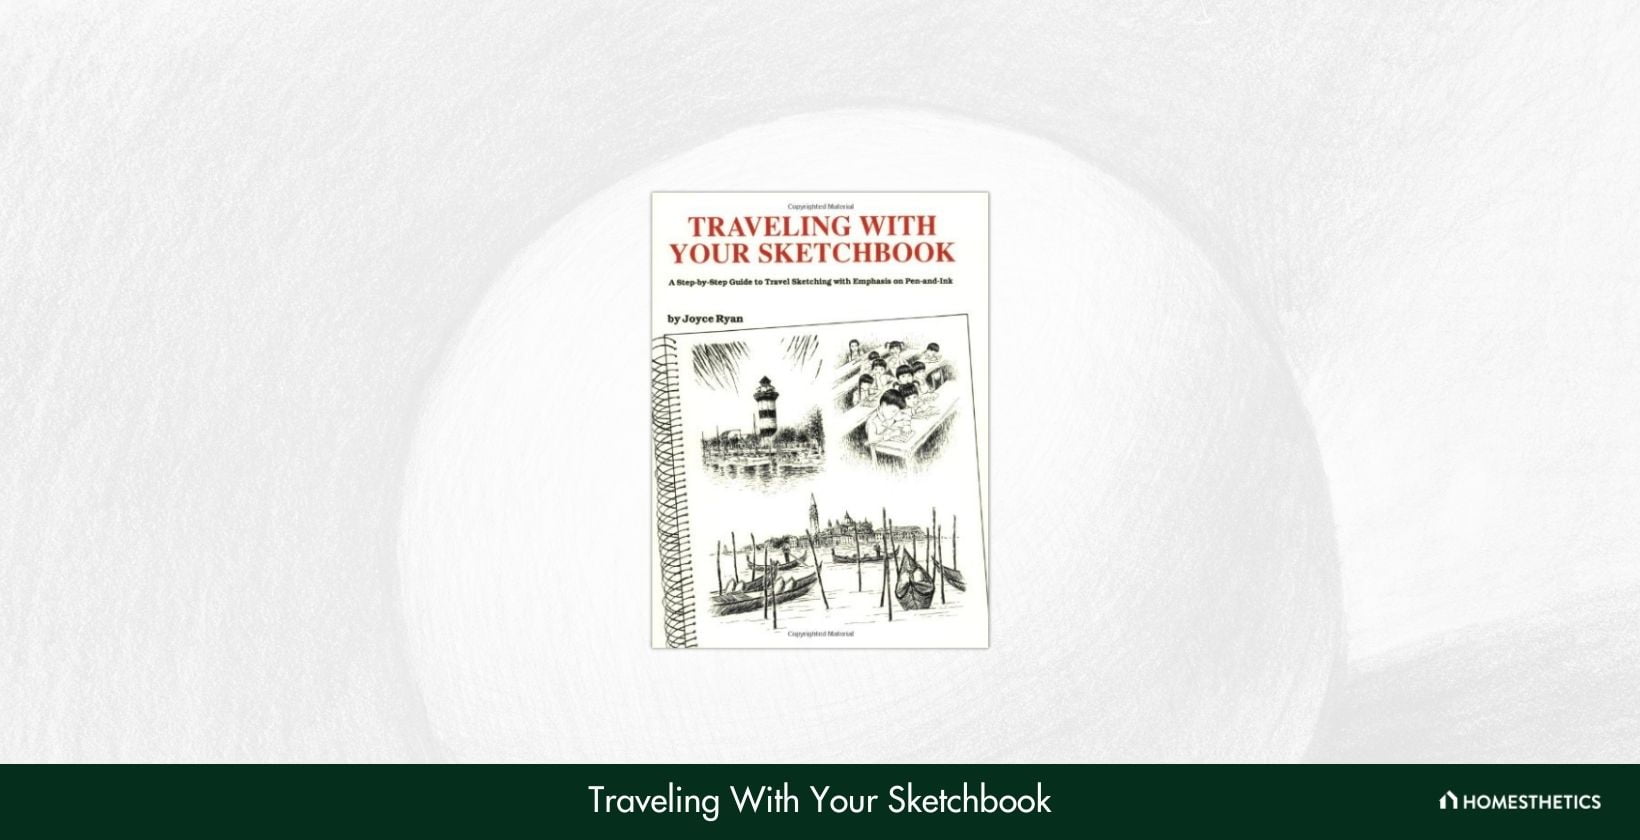 Traveling With Your Sketchbook A Step by Step Guide to Travel Sketching with Emphasis on Pen and Ink